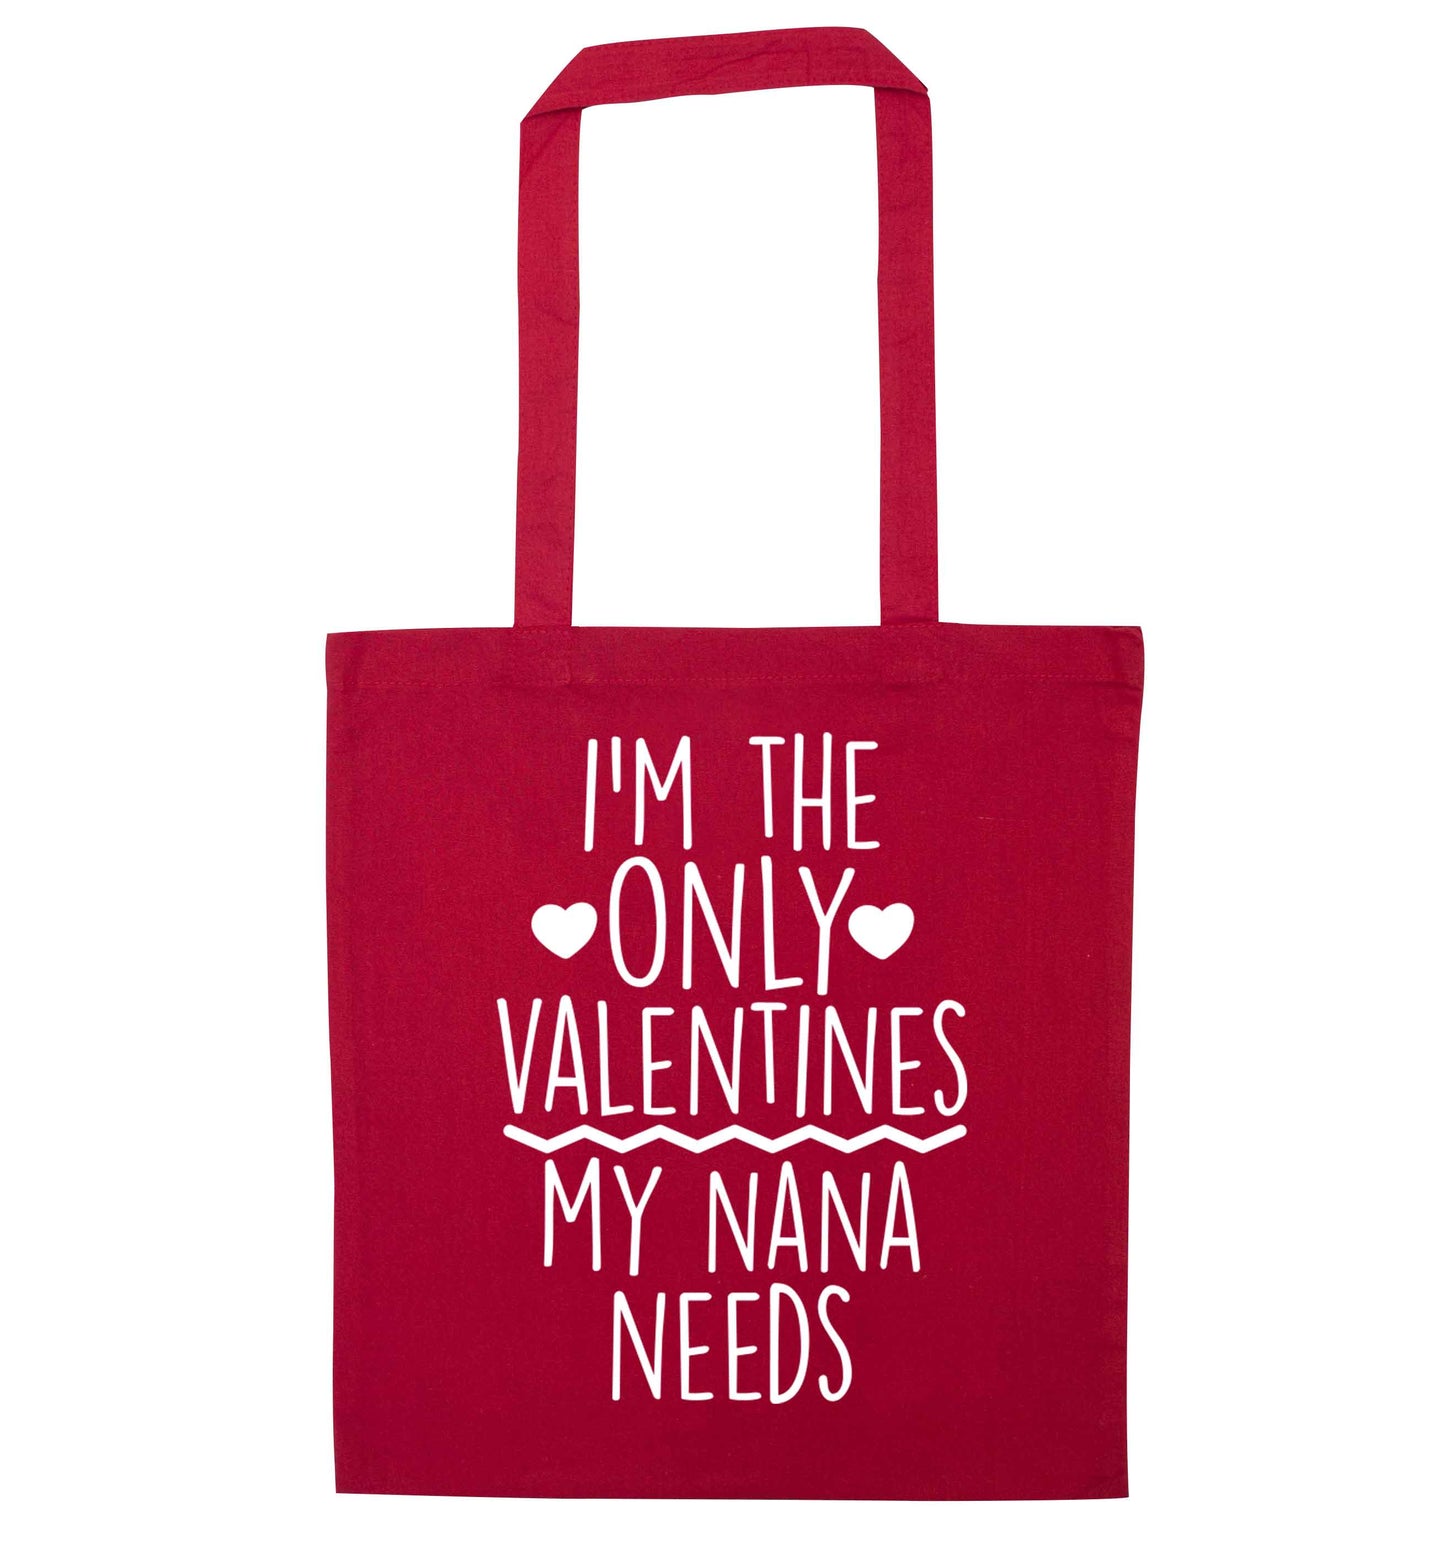 I'm the only valentines my nana needs red tote bag